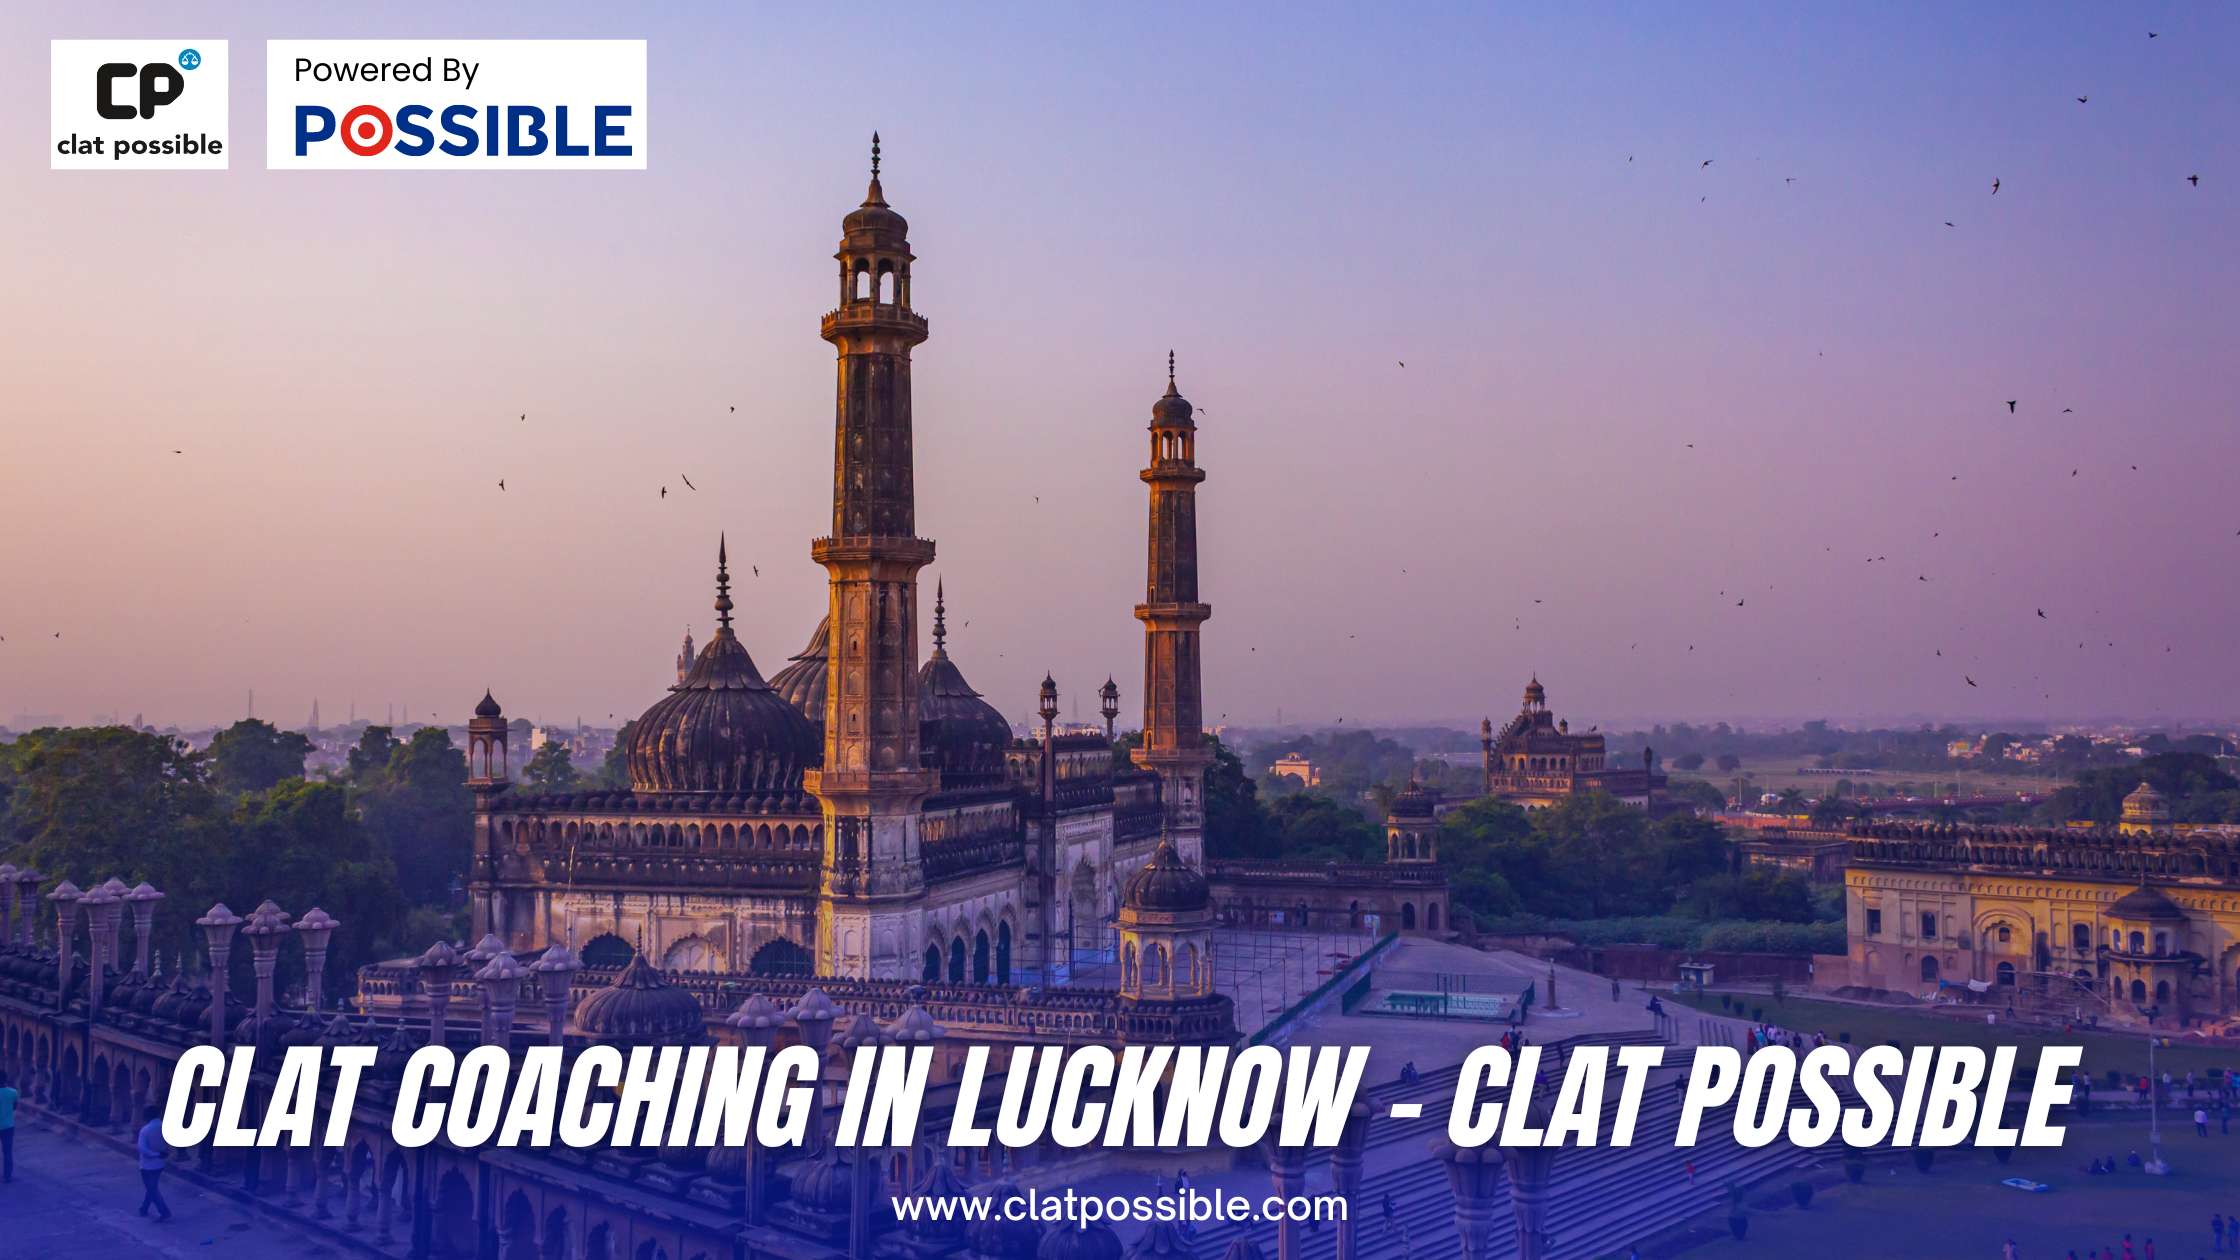 CLAT Coaching in Lucknow